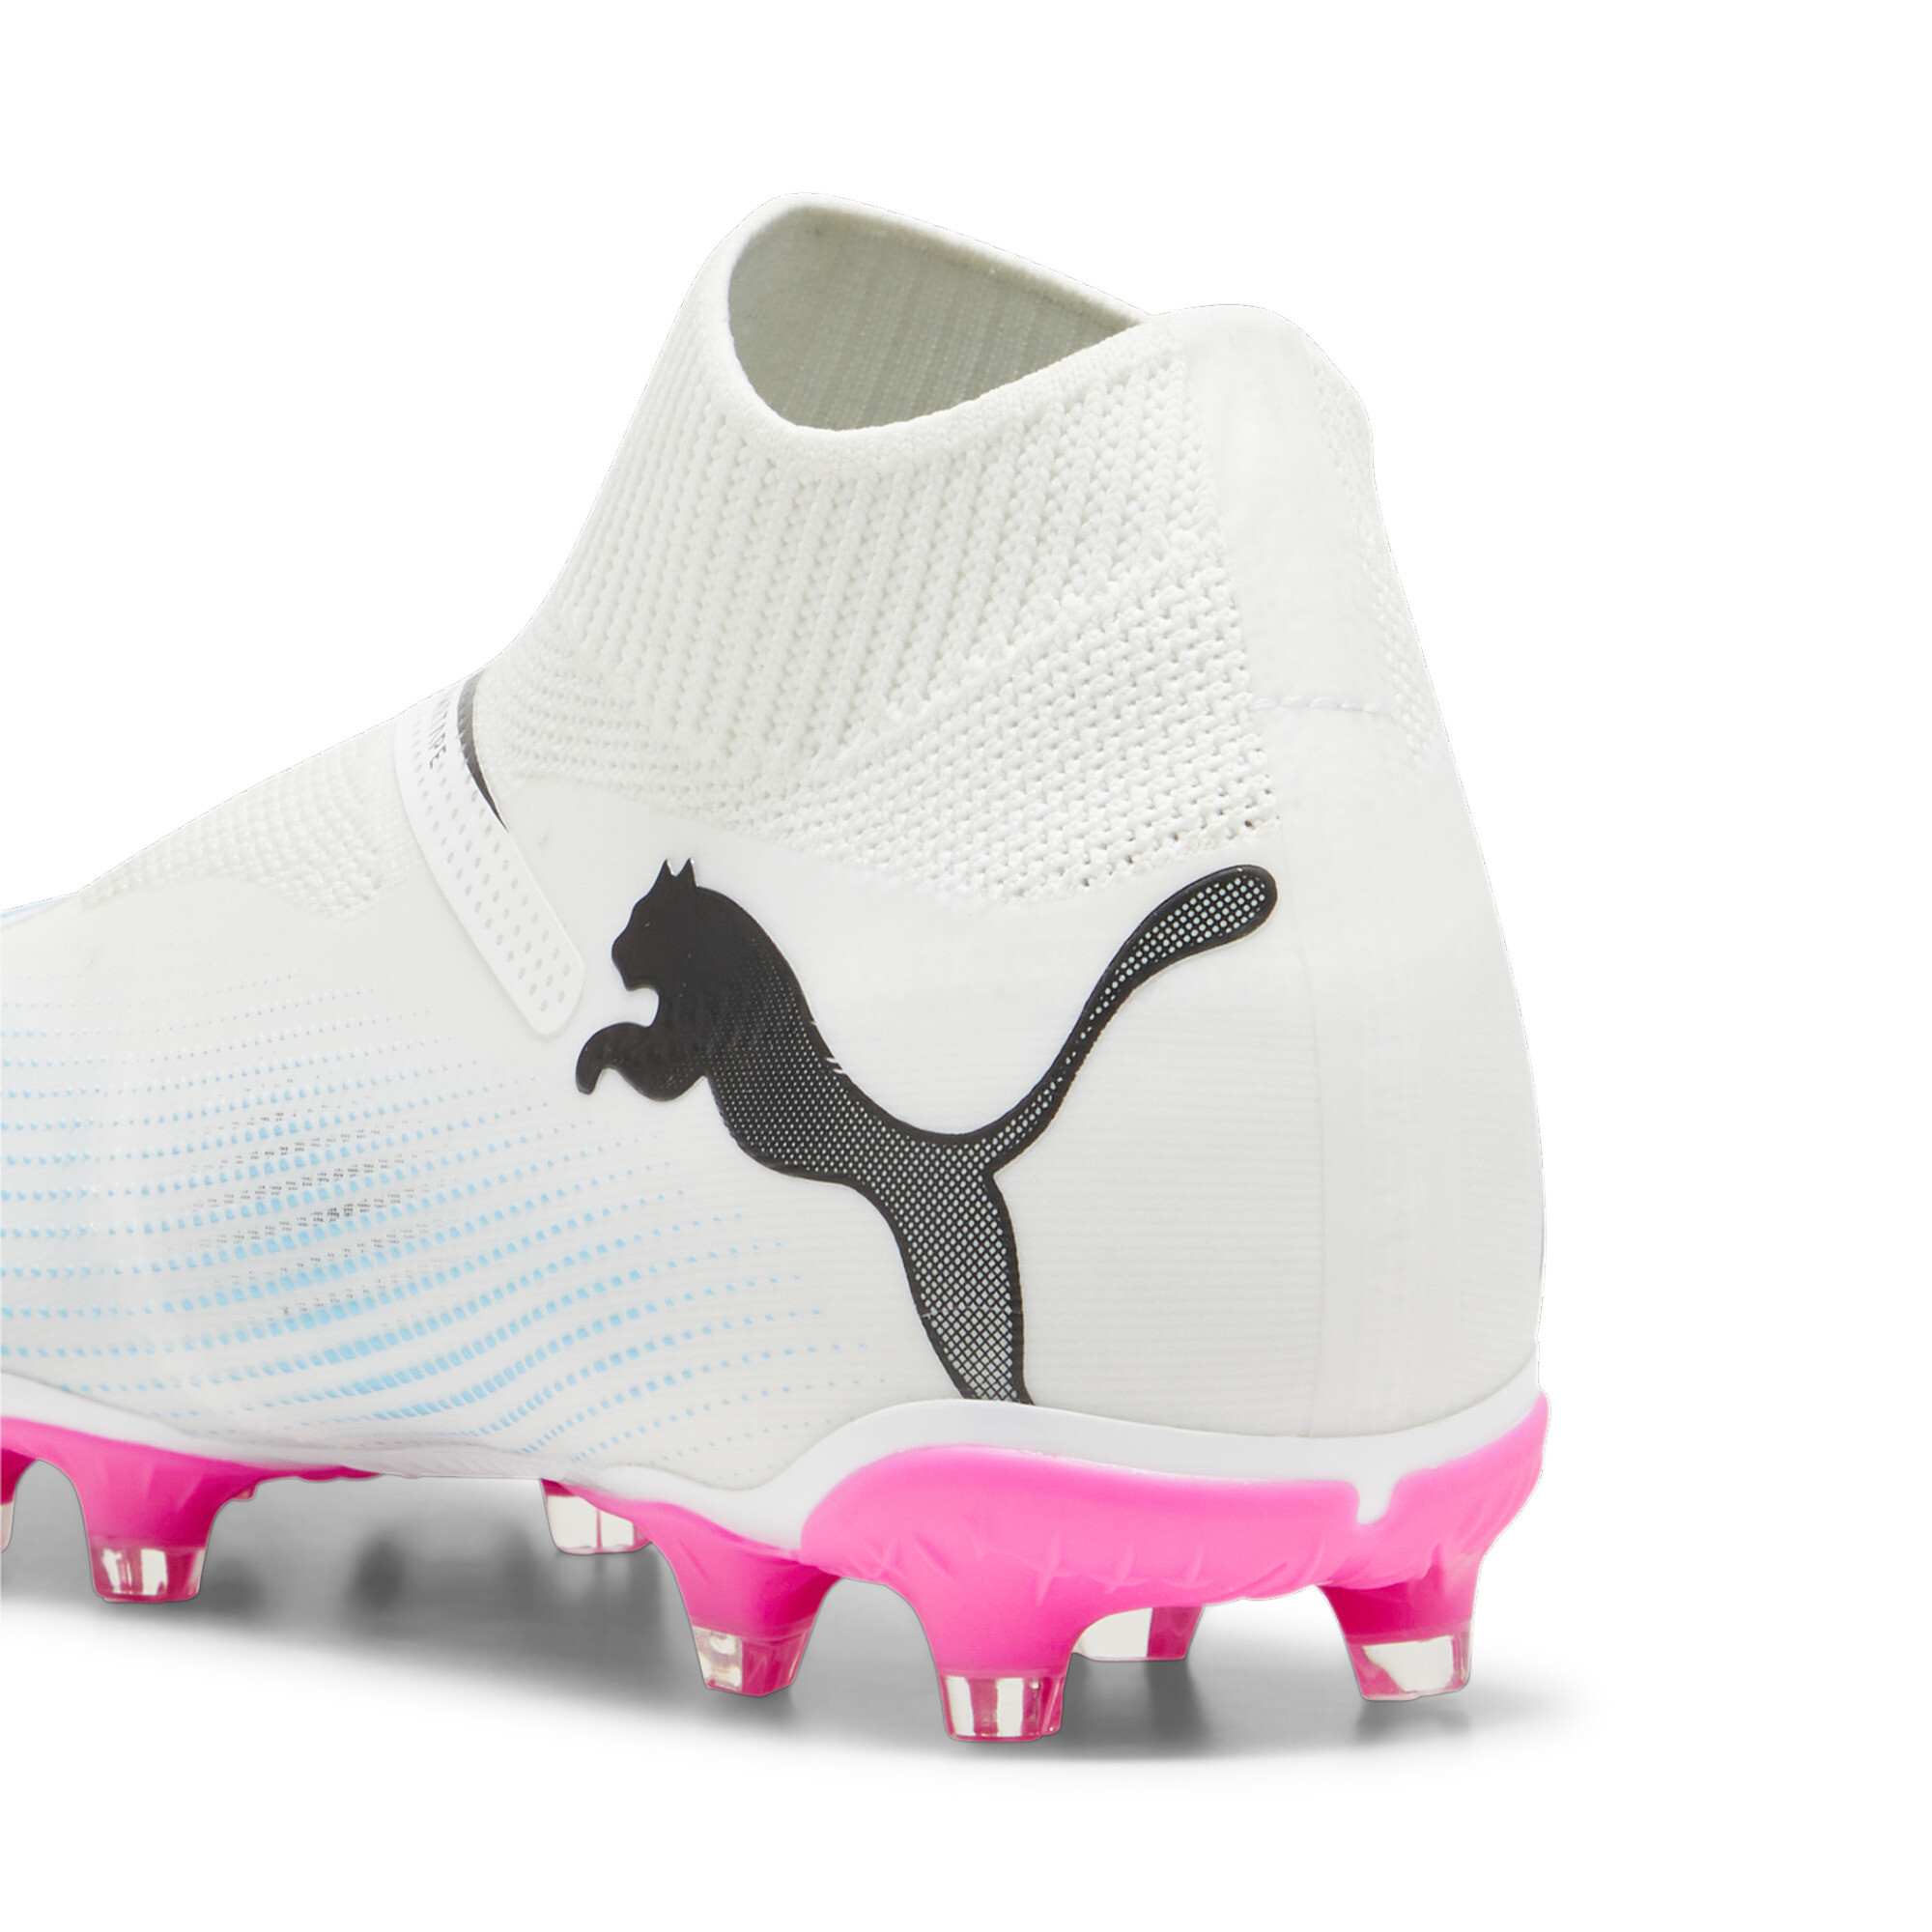 Men's PUMA FUTURE 7 MATCH FG/AG Laceless Football Boots In White/Pink, Size EU 44